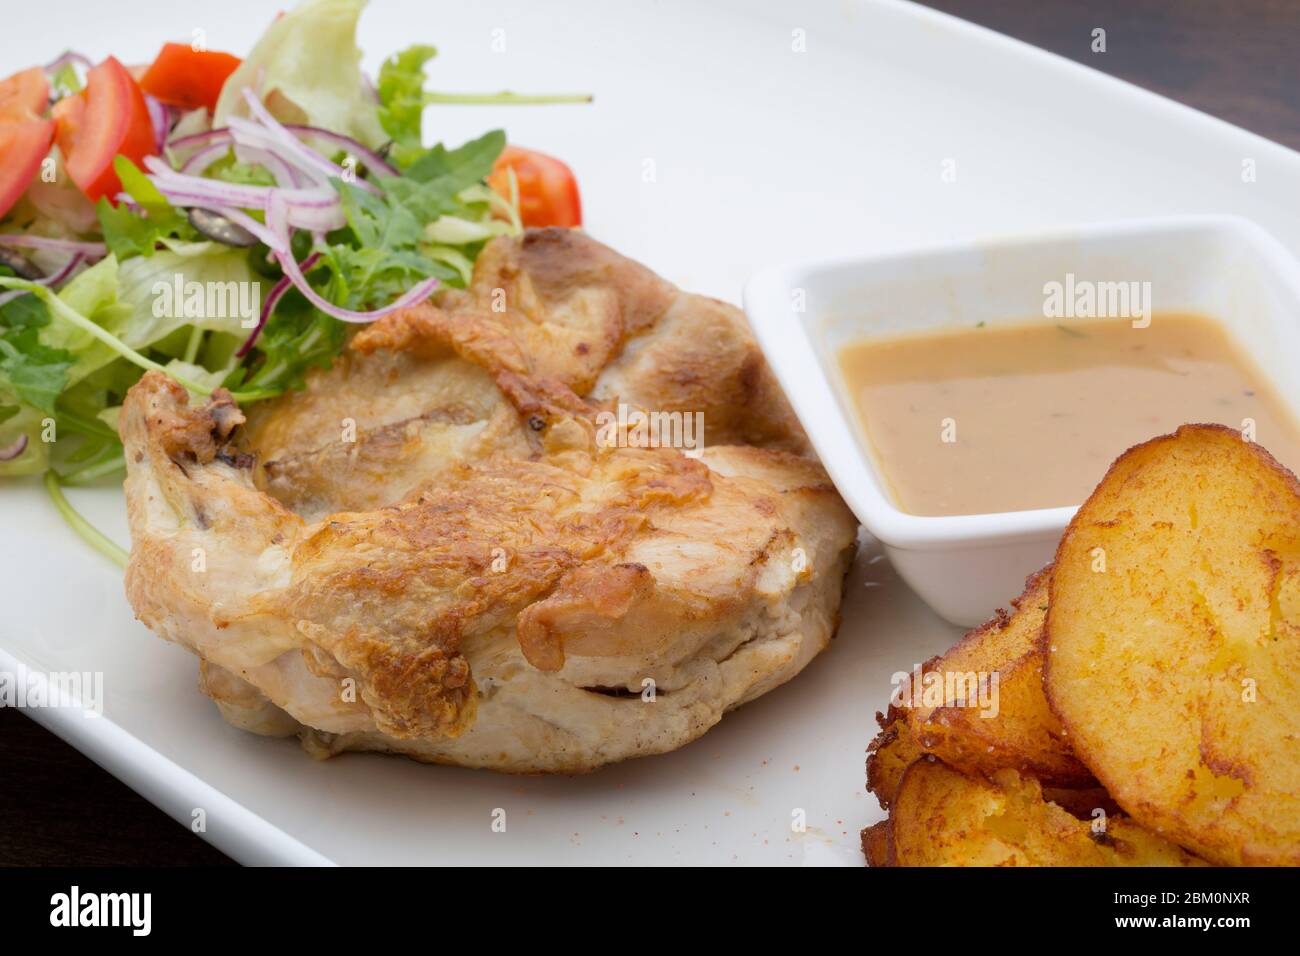 Roasted chicken with sauce, baked potatoes and a mixed salad in a white ceramic plate on a wooden table Stock Photo